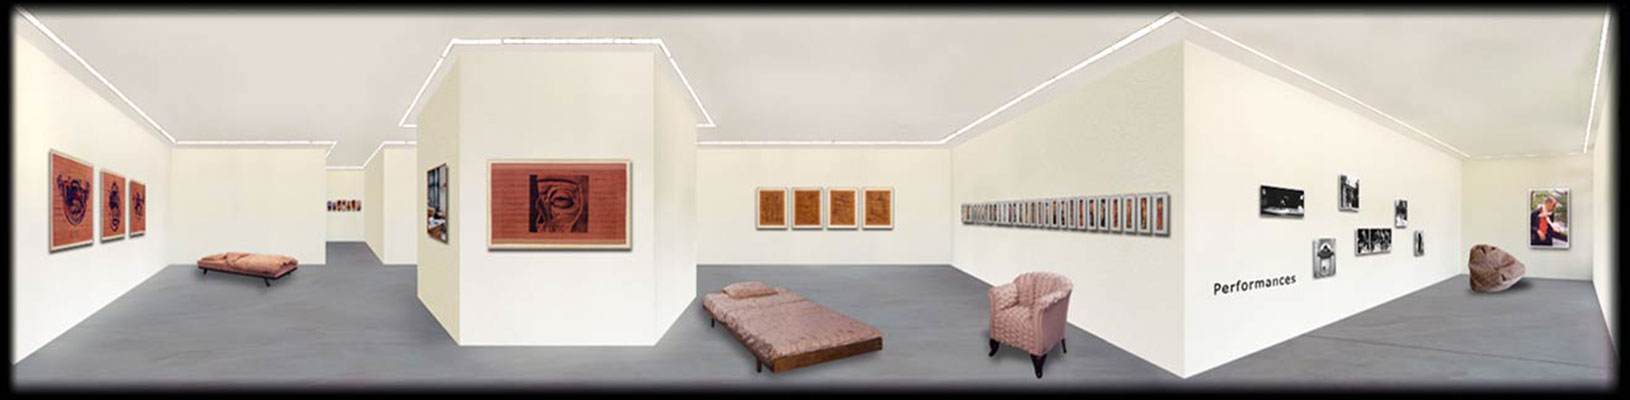 Before, © 1997 and before, A collection of works produced before 1997, shown as a virtuell exhibition